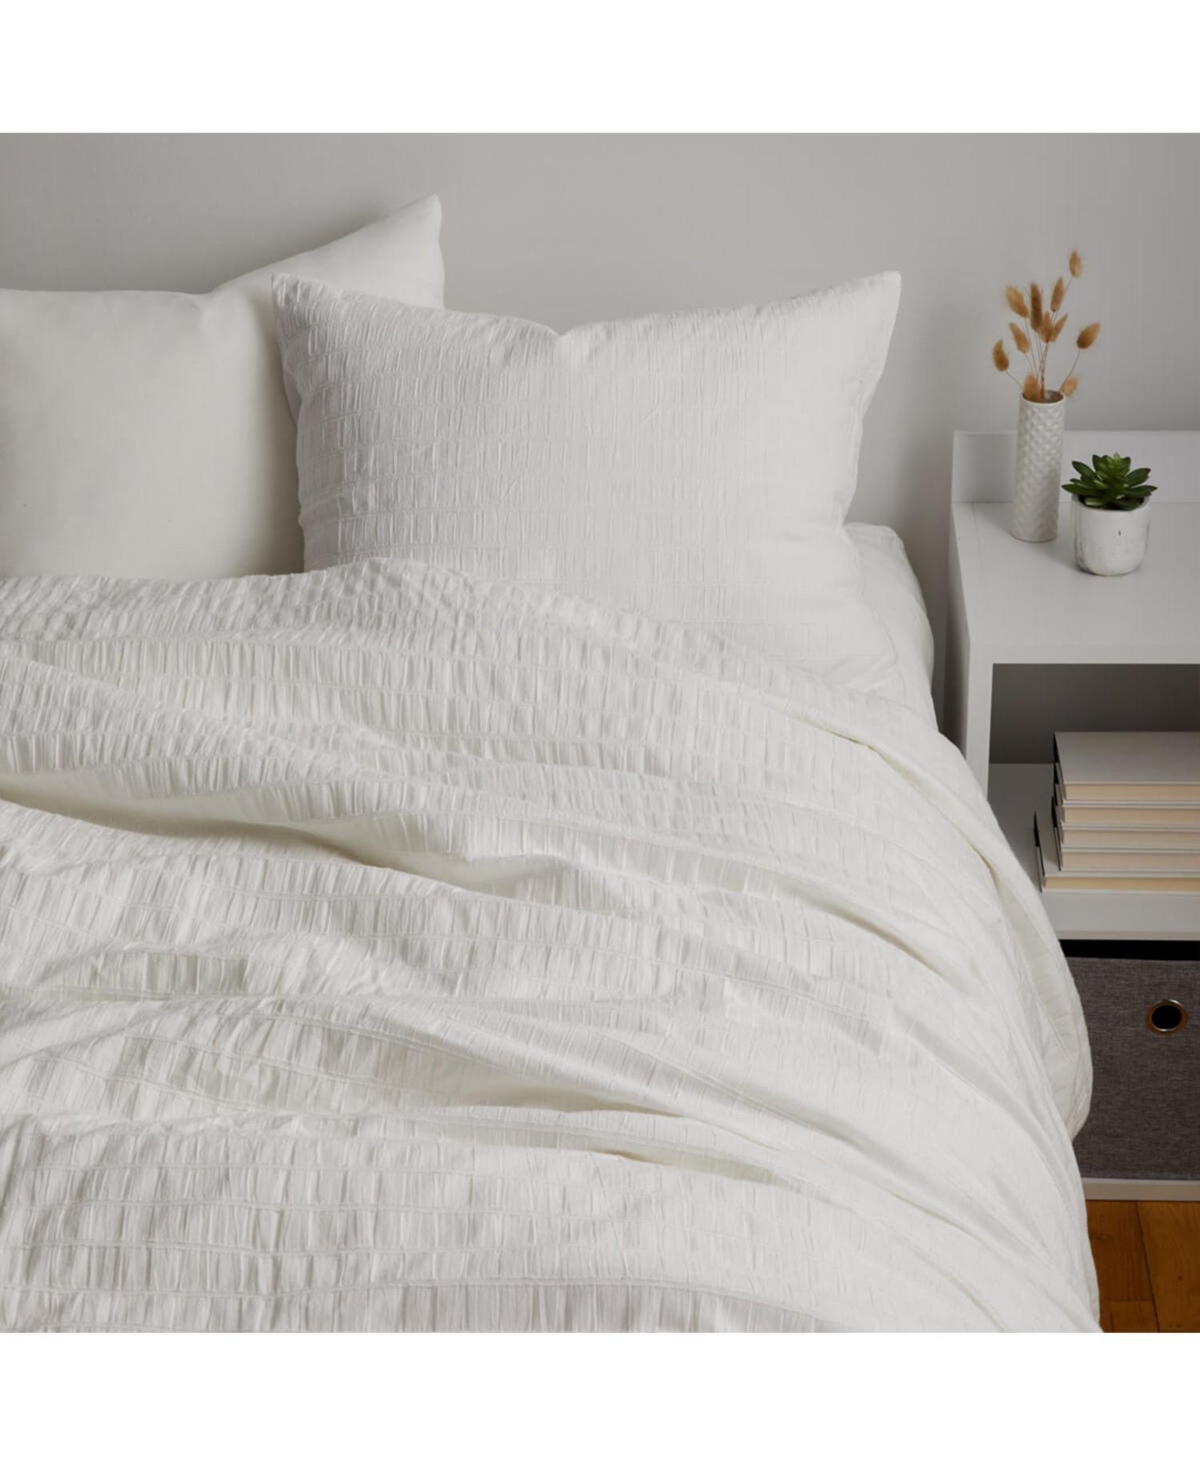 Dormify Bailey Textured Stripe Duvet Cover And Sham Set, Full/queen, Ultra-cute Styles To Personalize Your R In Bailey White